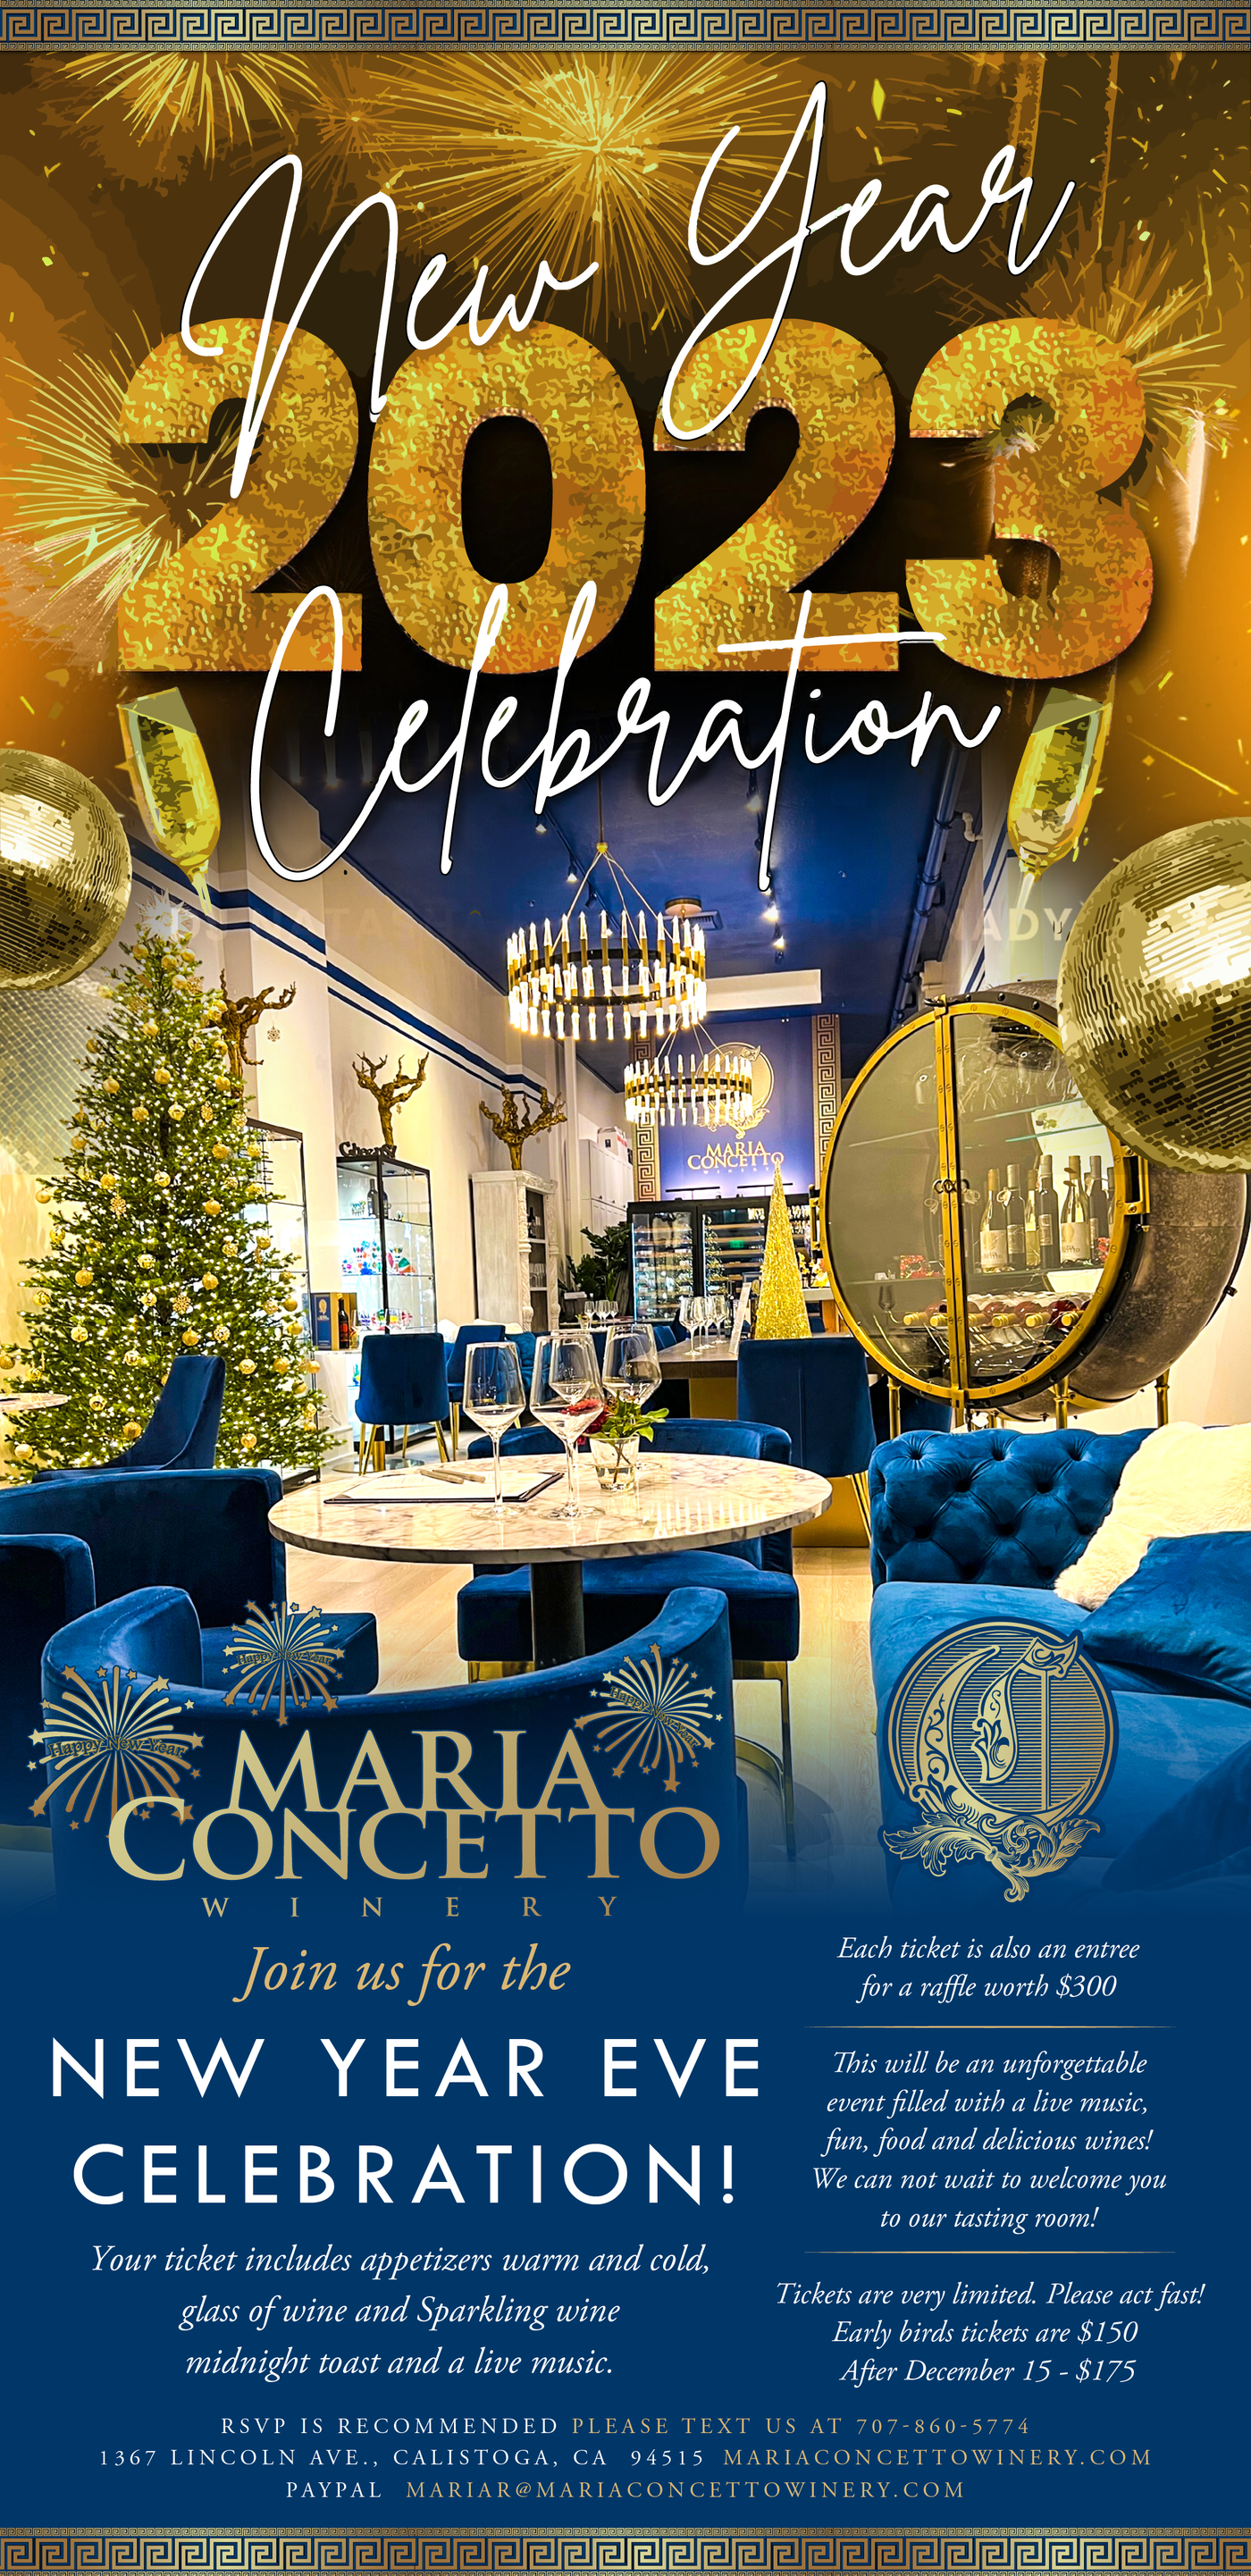 2023 NEW YEAR EVE CELEBRATION! – Maria Concetto Winery